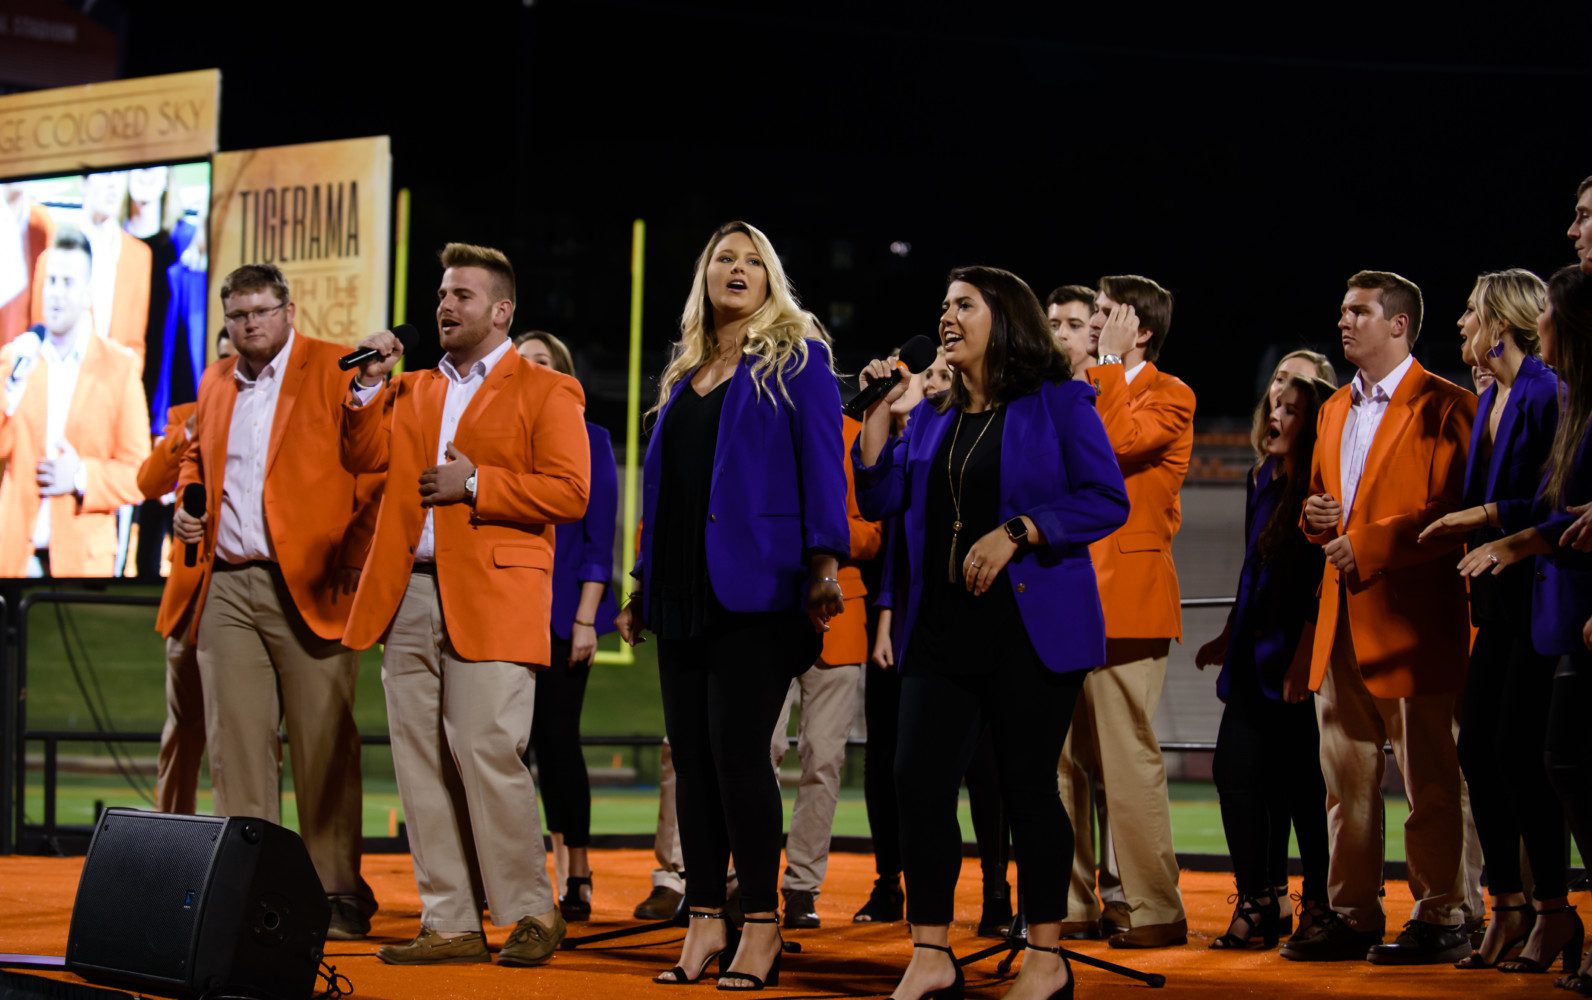 Members of Tigeroar and Take Note, student a capella groups, perform during Tigerama in 2018.